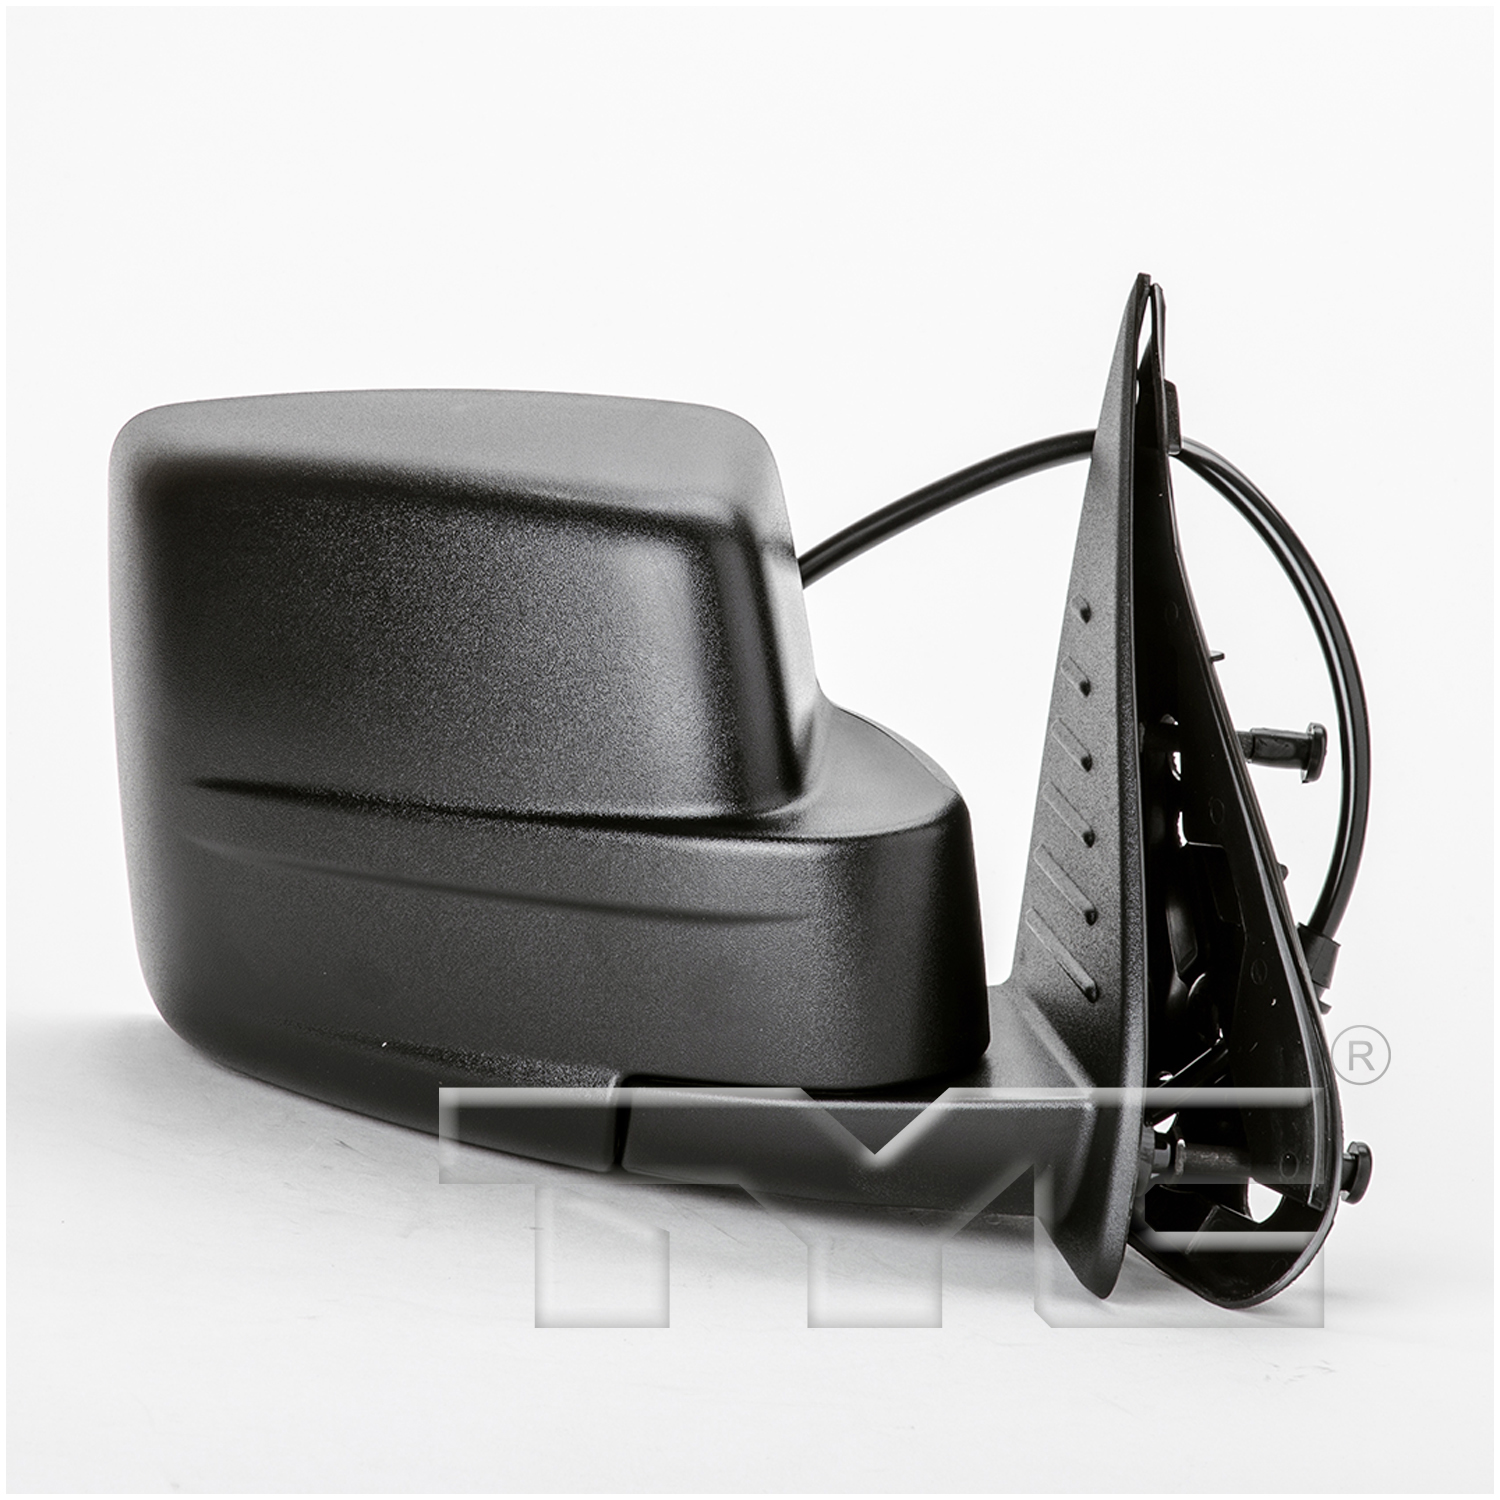 Aftermarket MIRRORS for JEEP - LIBERTY, LIBERTY,08-12,RT Mirror outside rear view